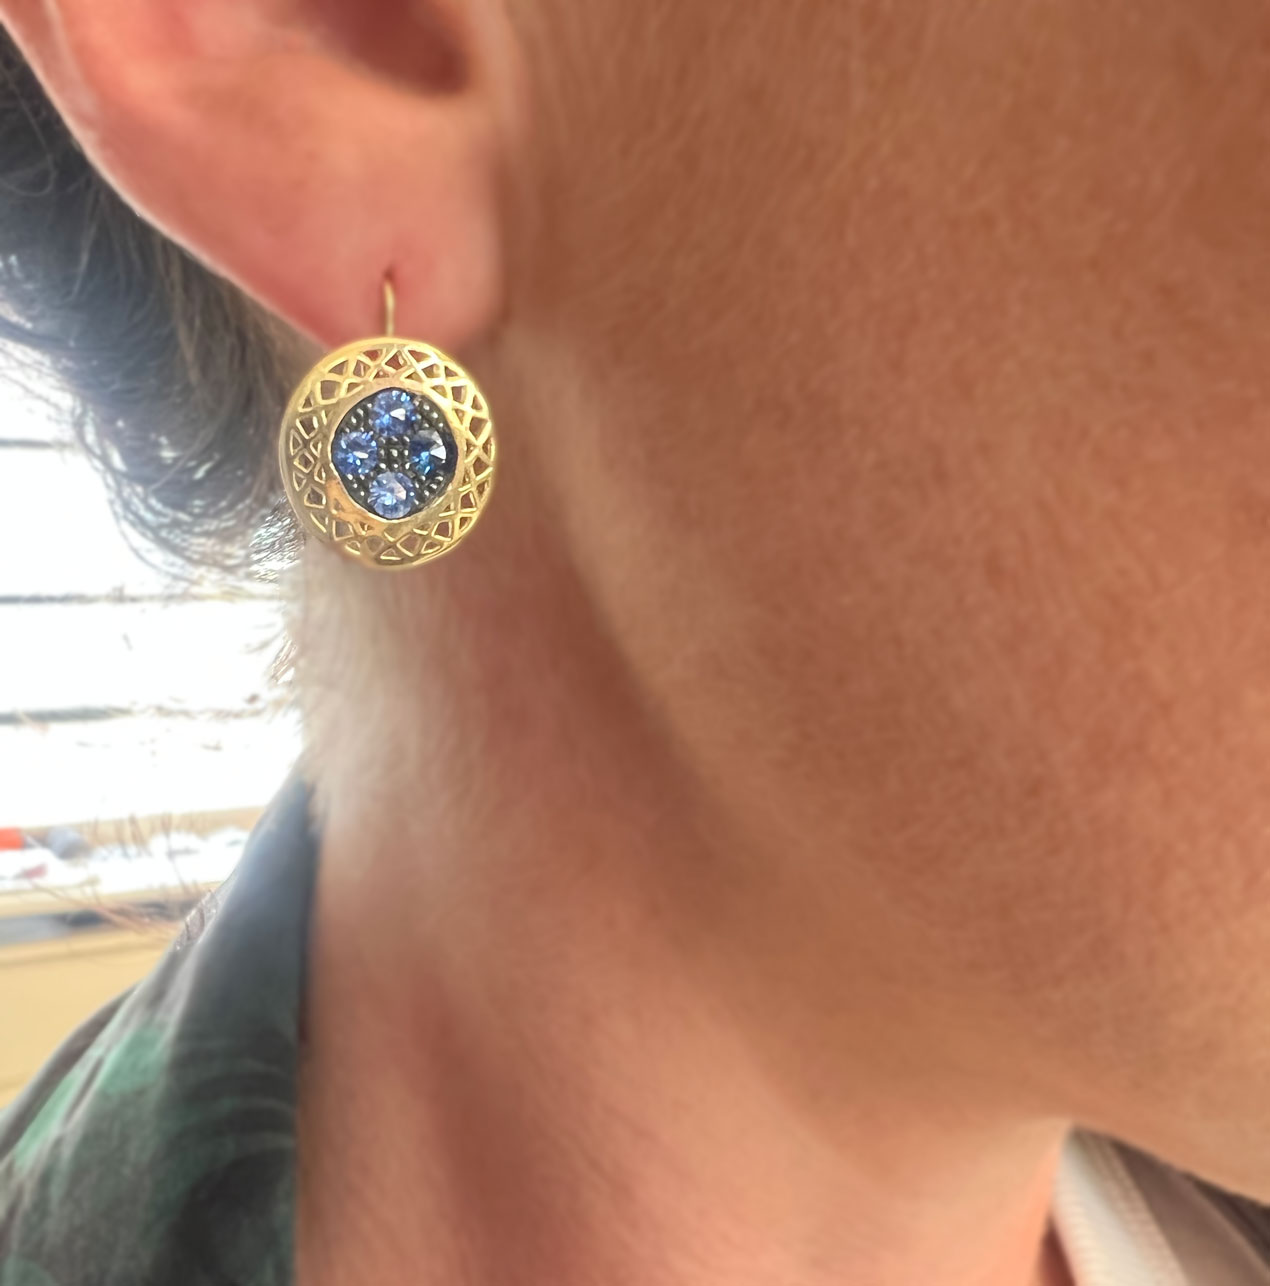 18k yellow gold Round crownwork disc set with blue sapphires in oxidized silver on hooks being worn on the ear